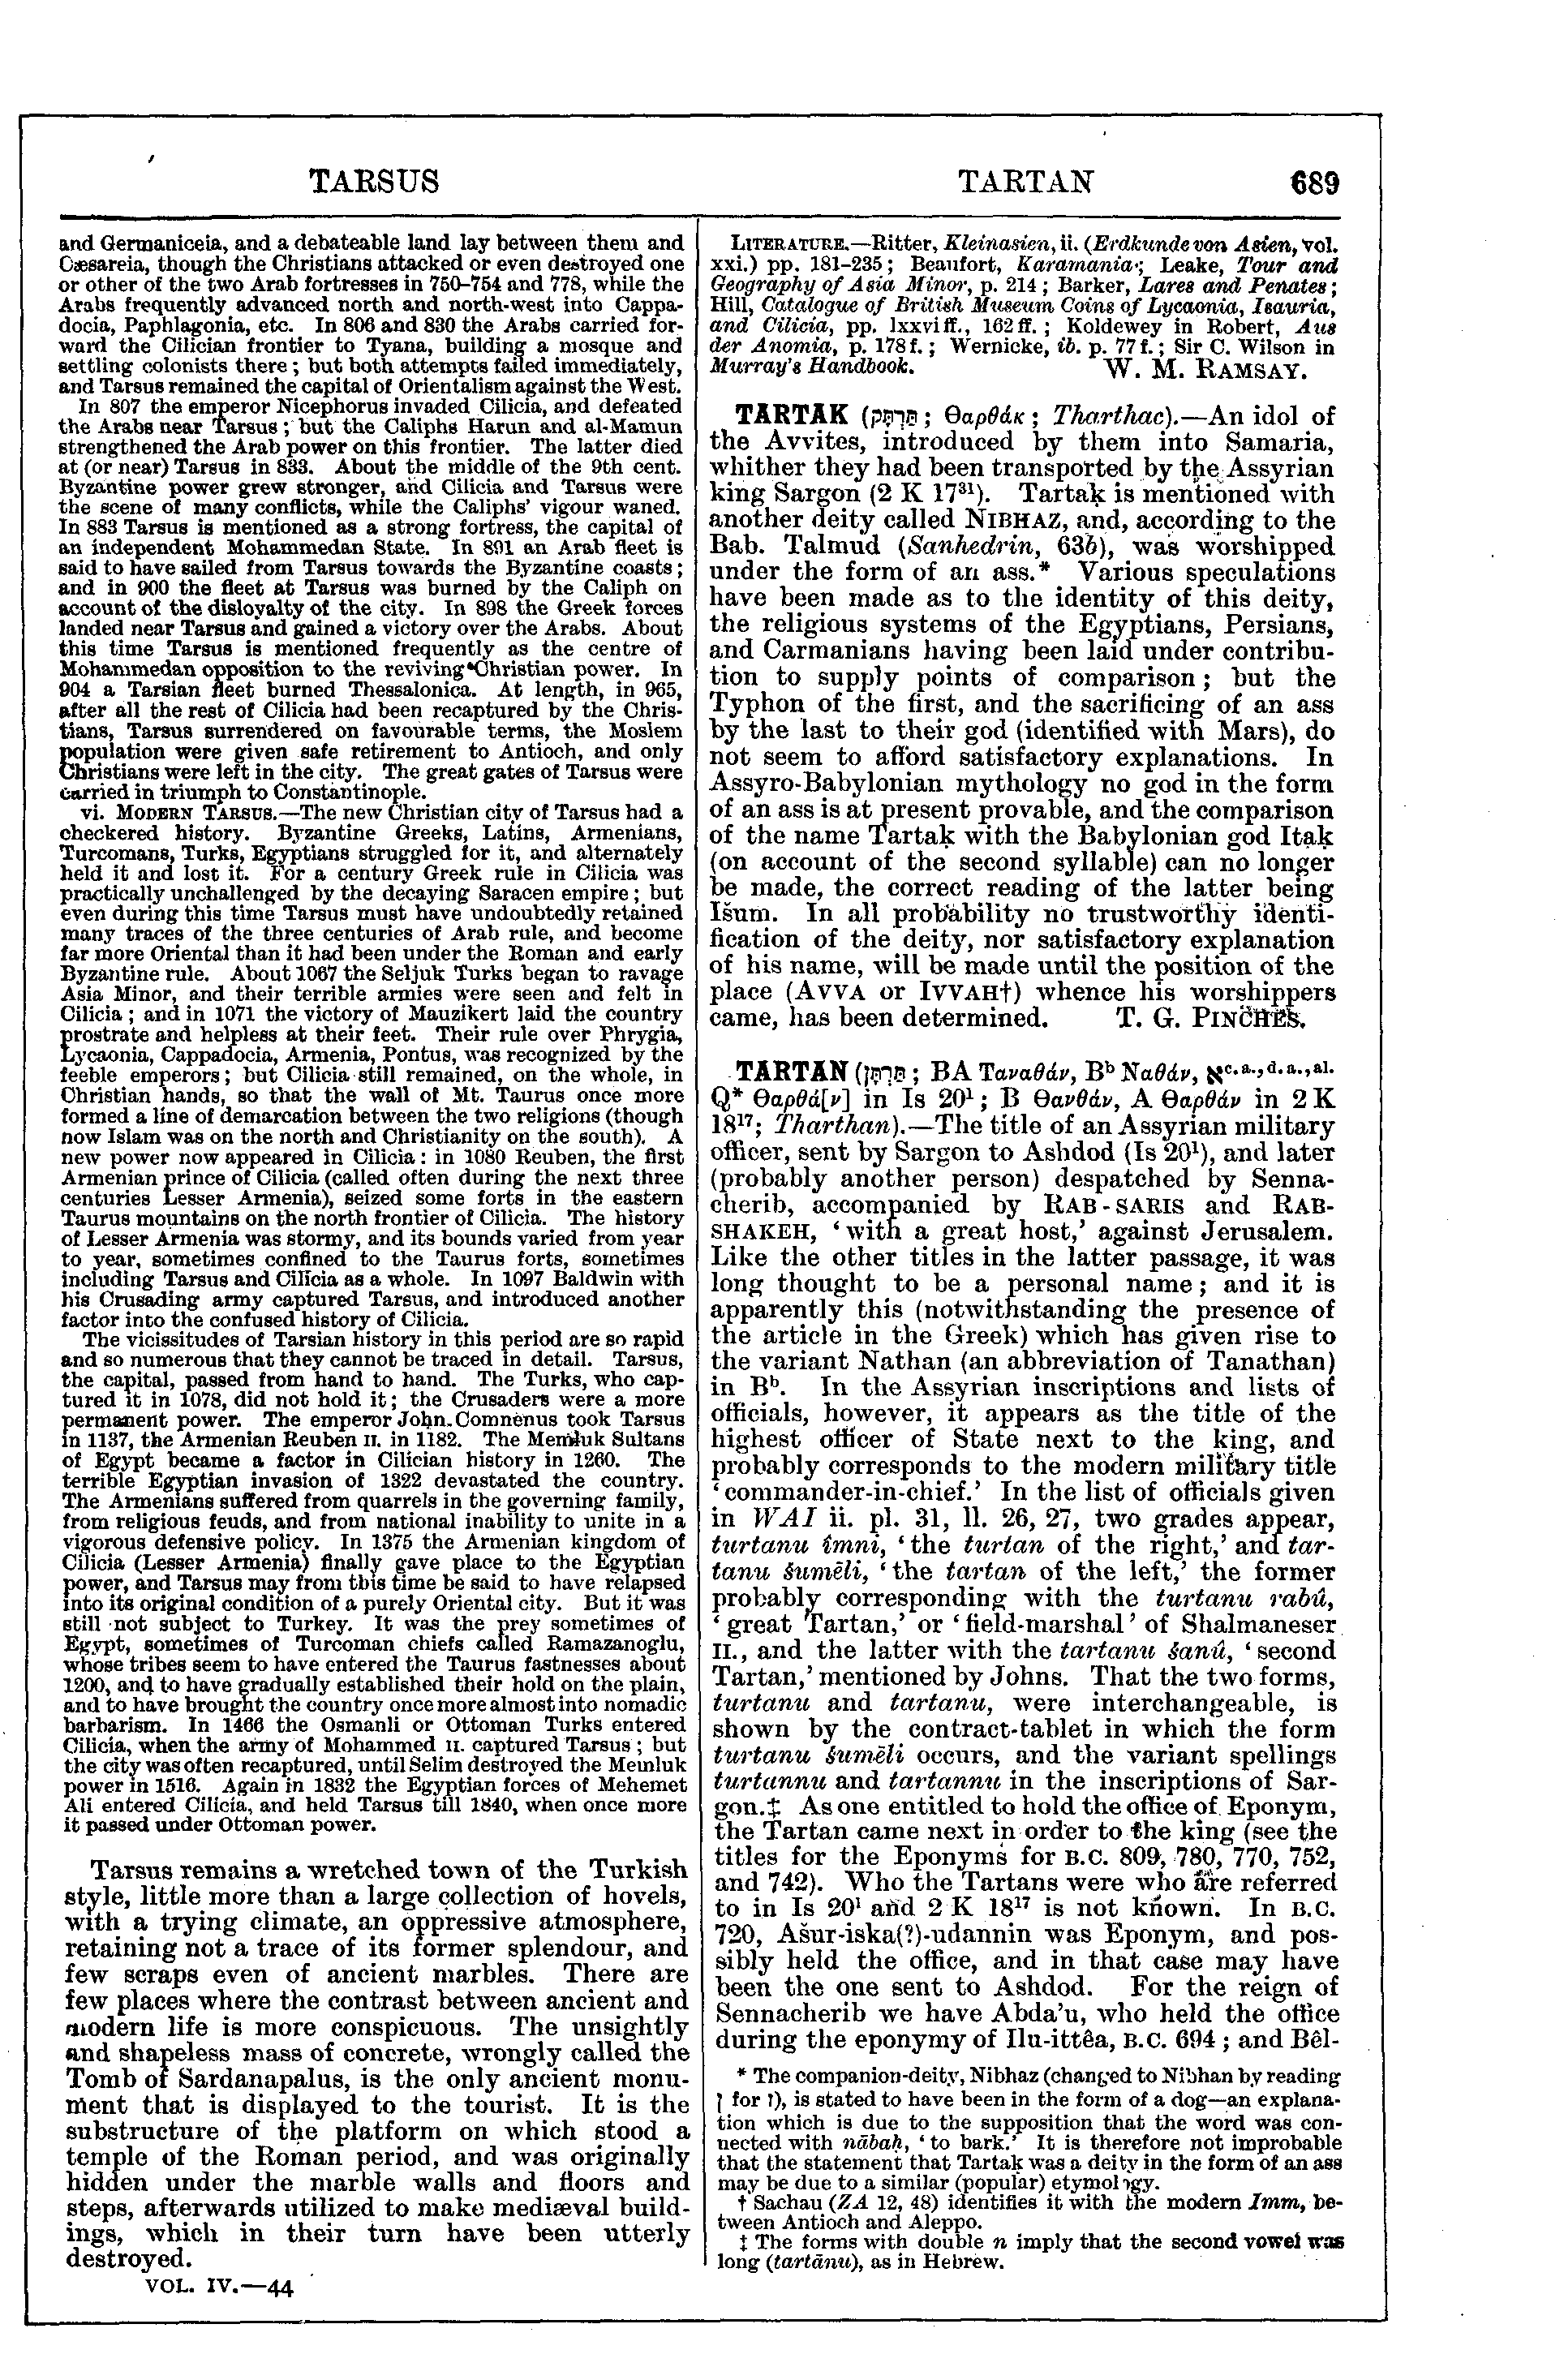 Image of page 689